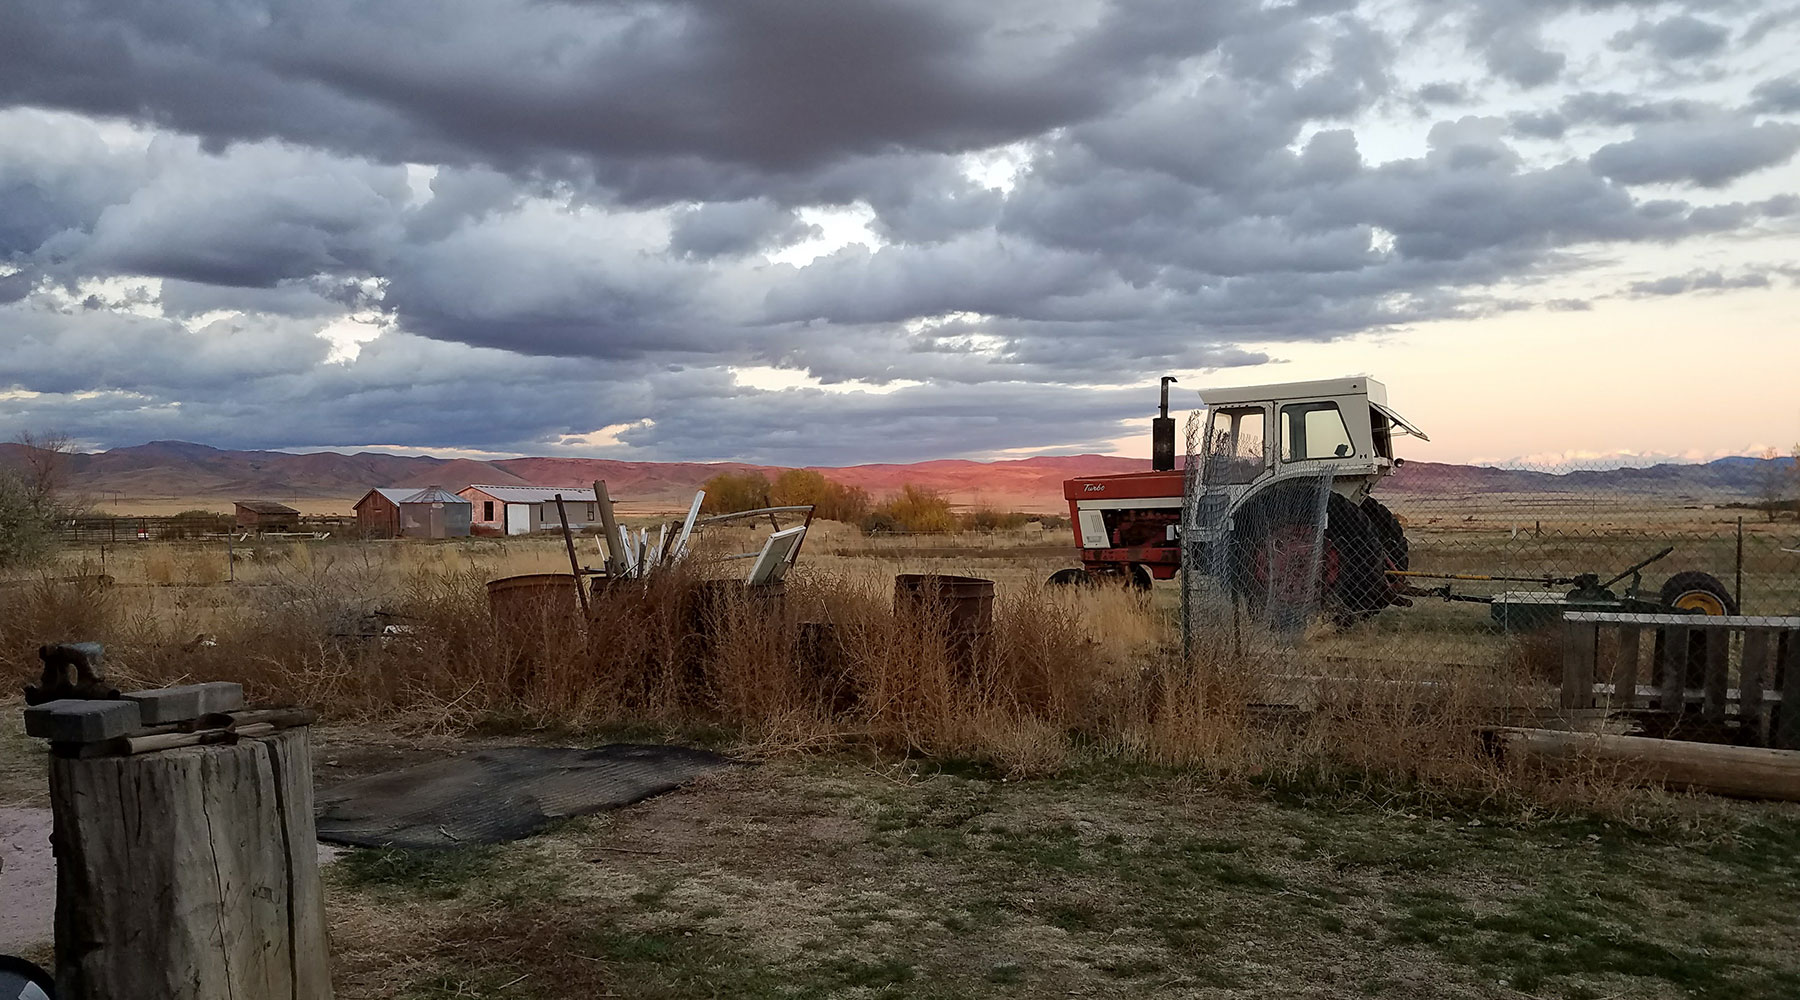 Idaho farm and antique tractor under cloudy sky